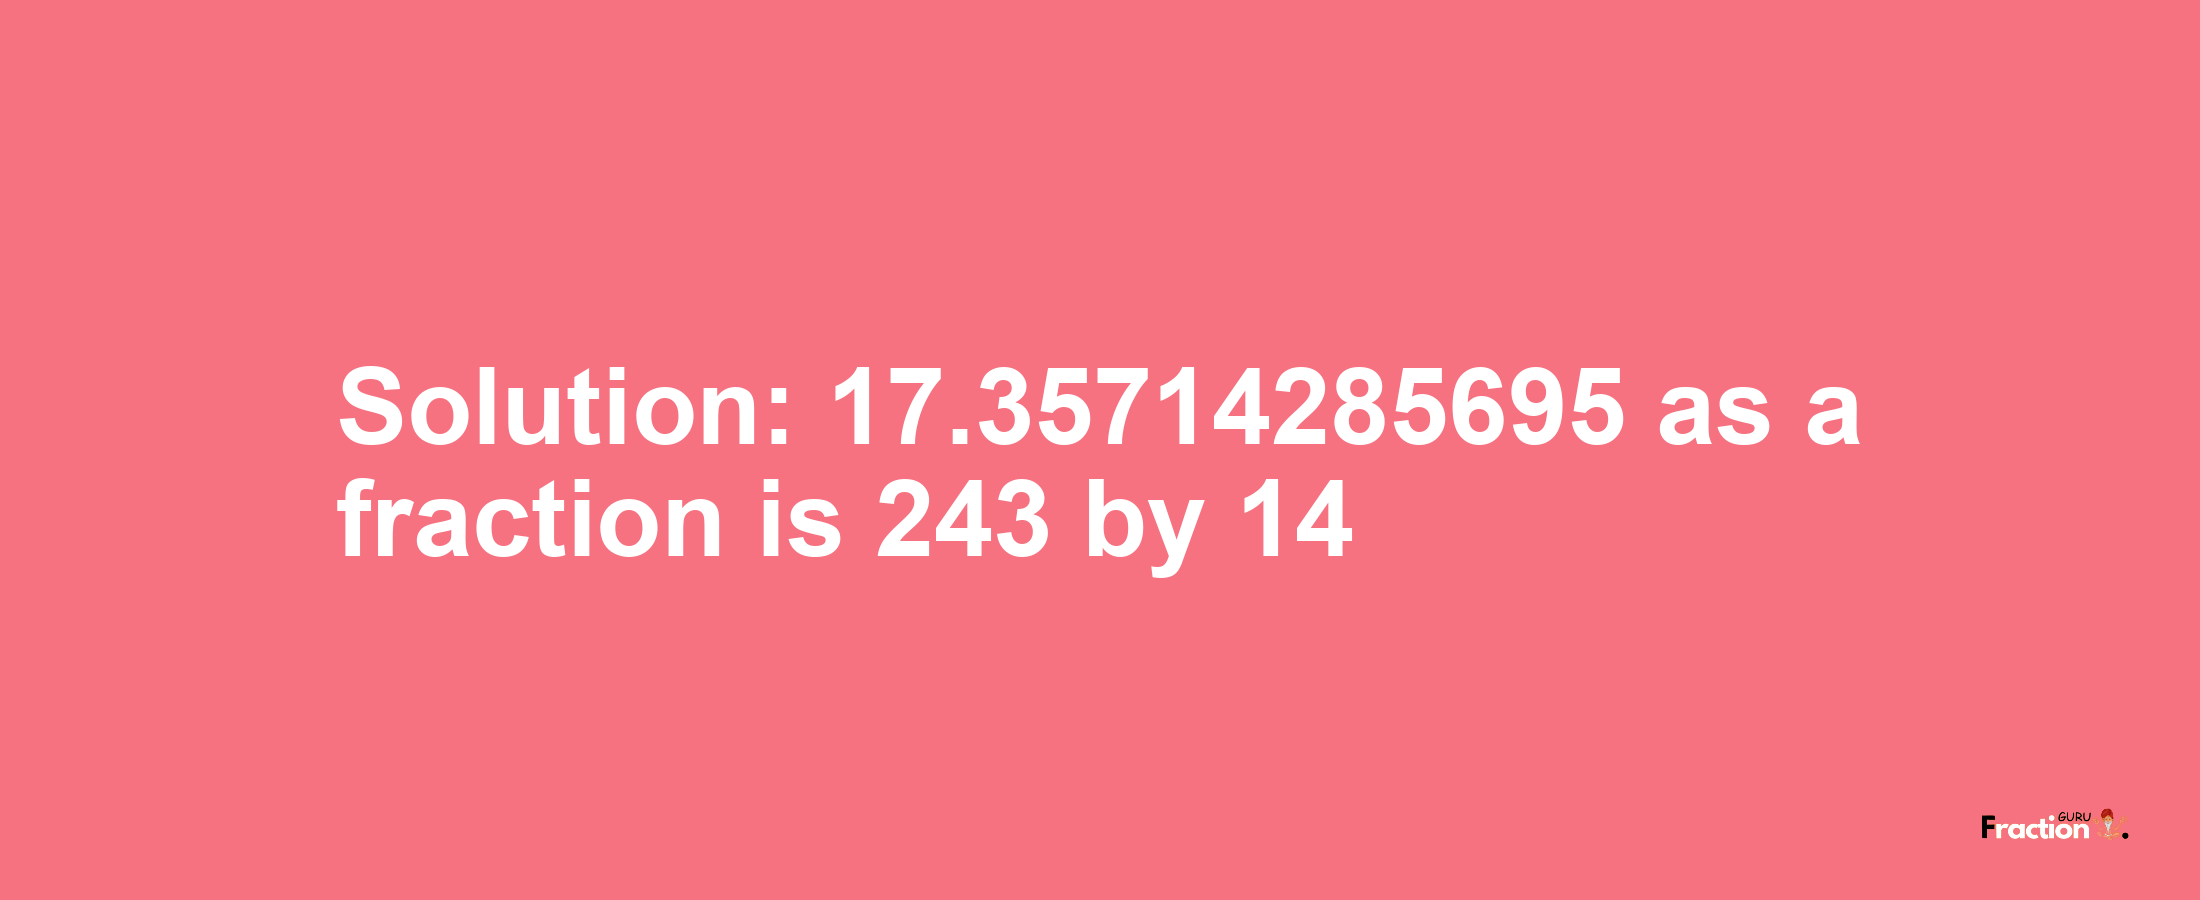 Solution:17.35714285695 as a fraction is 243/14